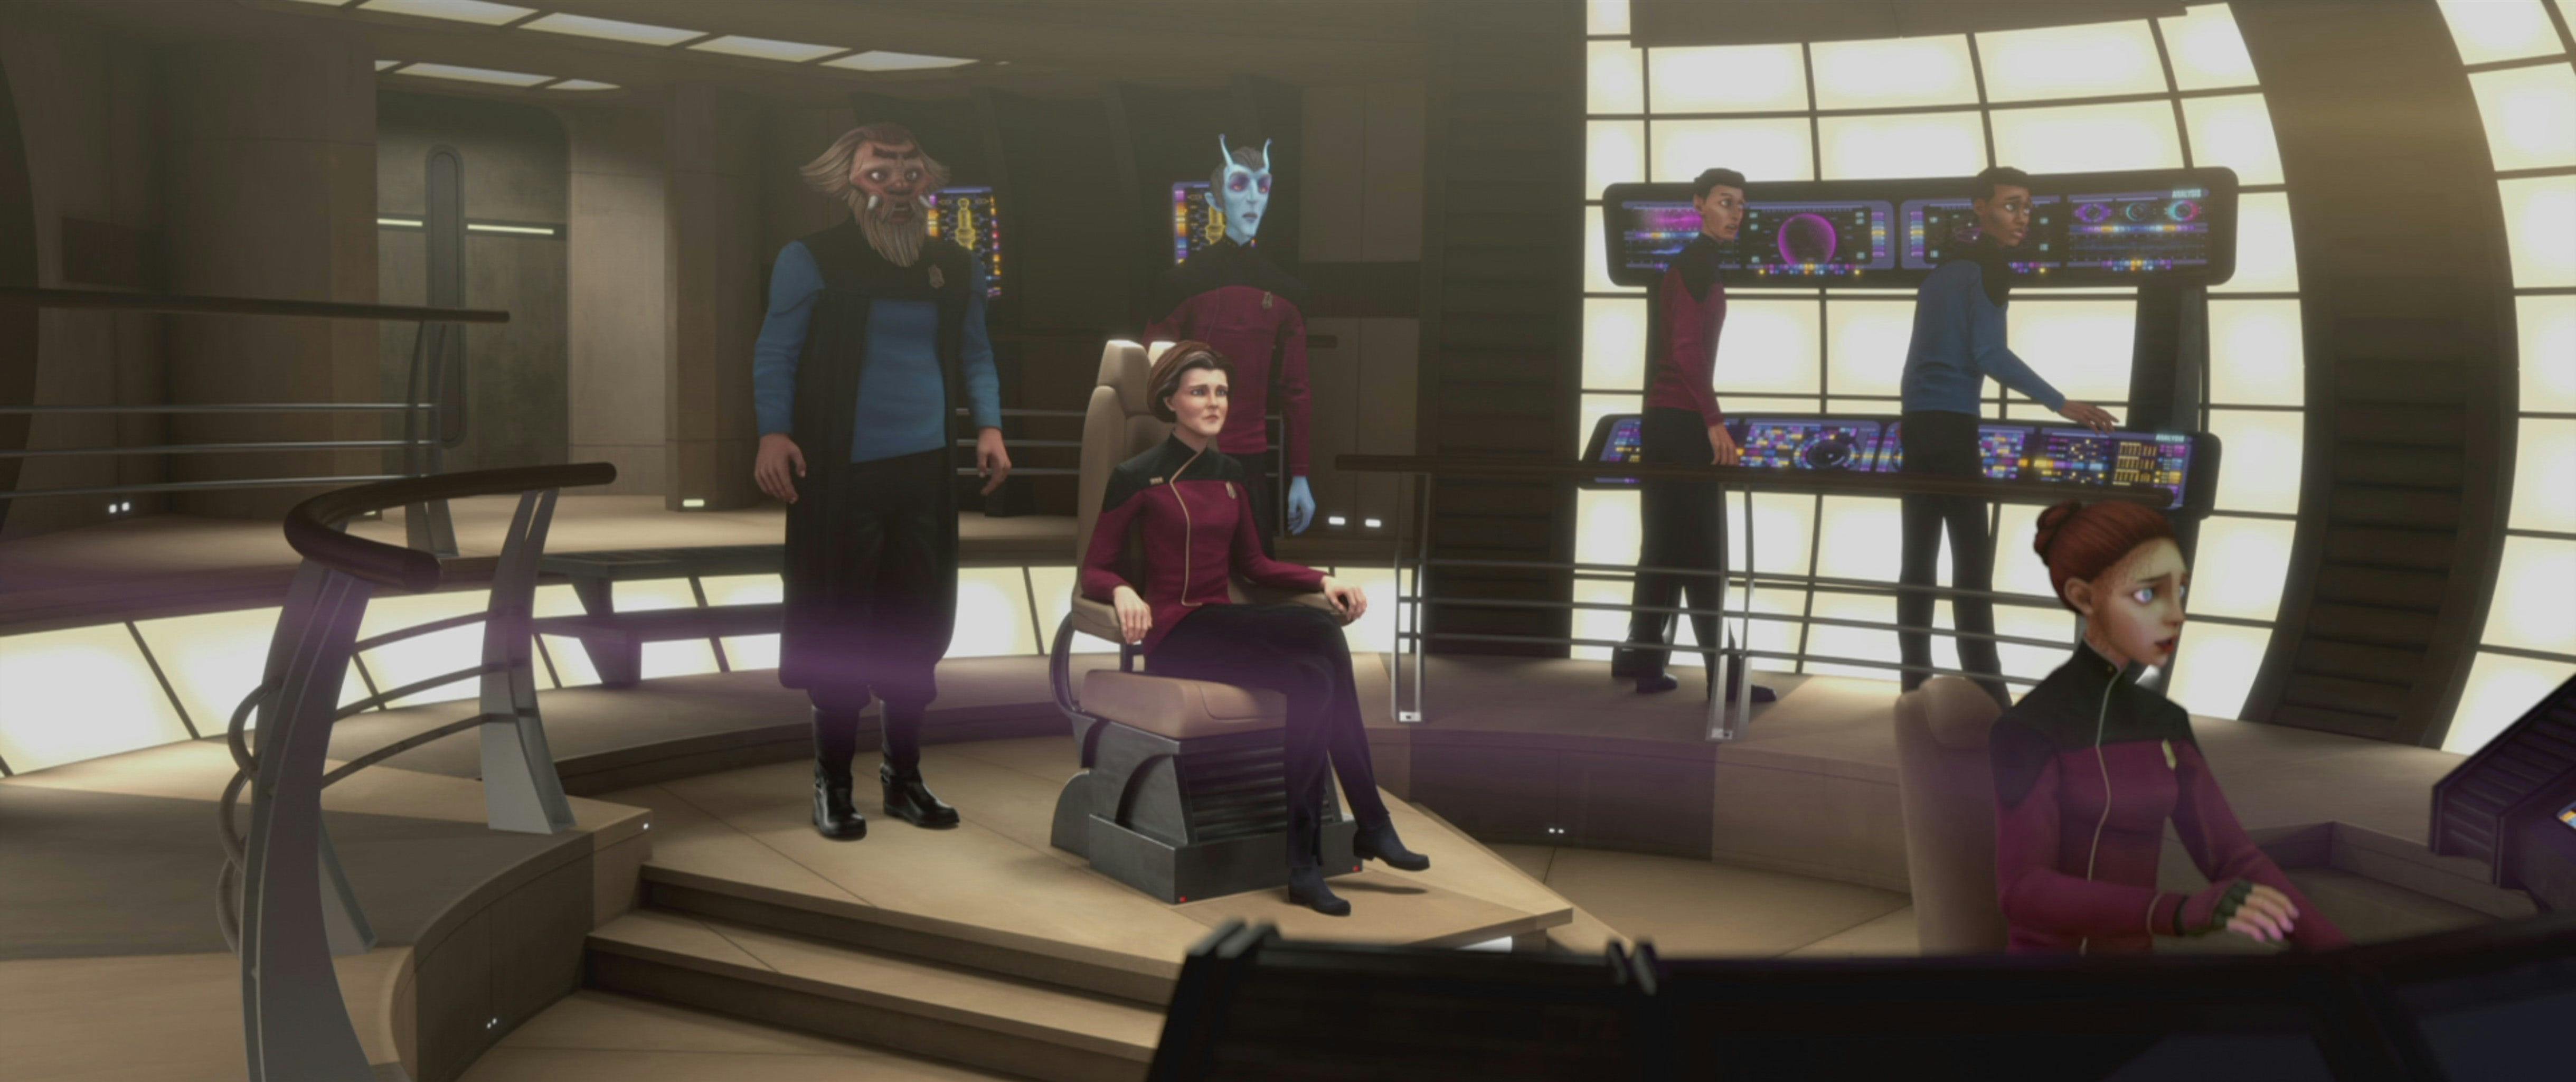 Admiral Janeway in her captain's chair along with the Defiant crew look ahead on Star Trek: Prodigy in shock